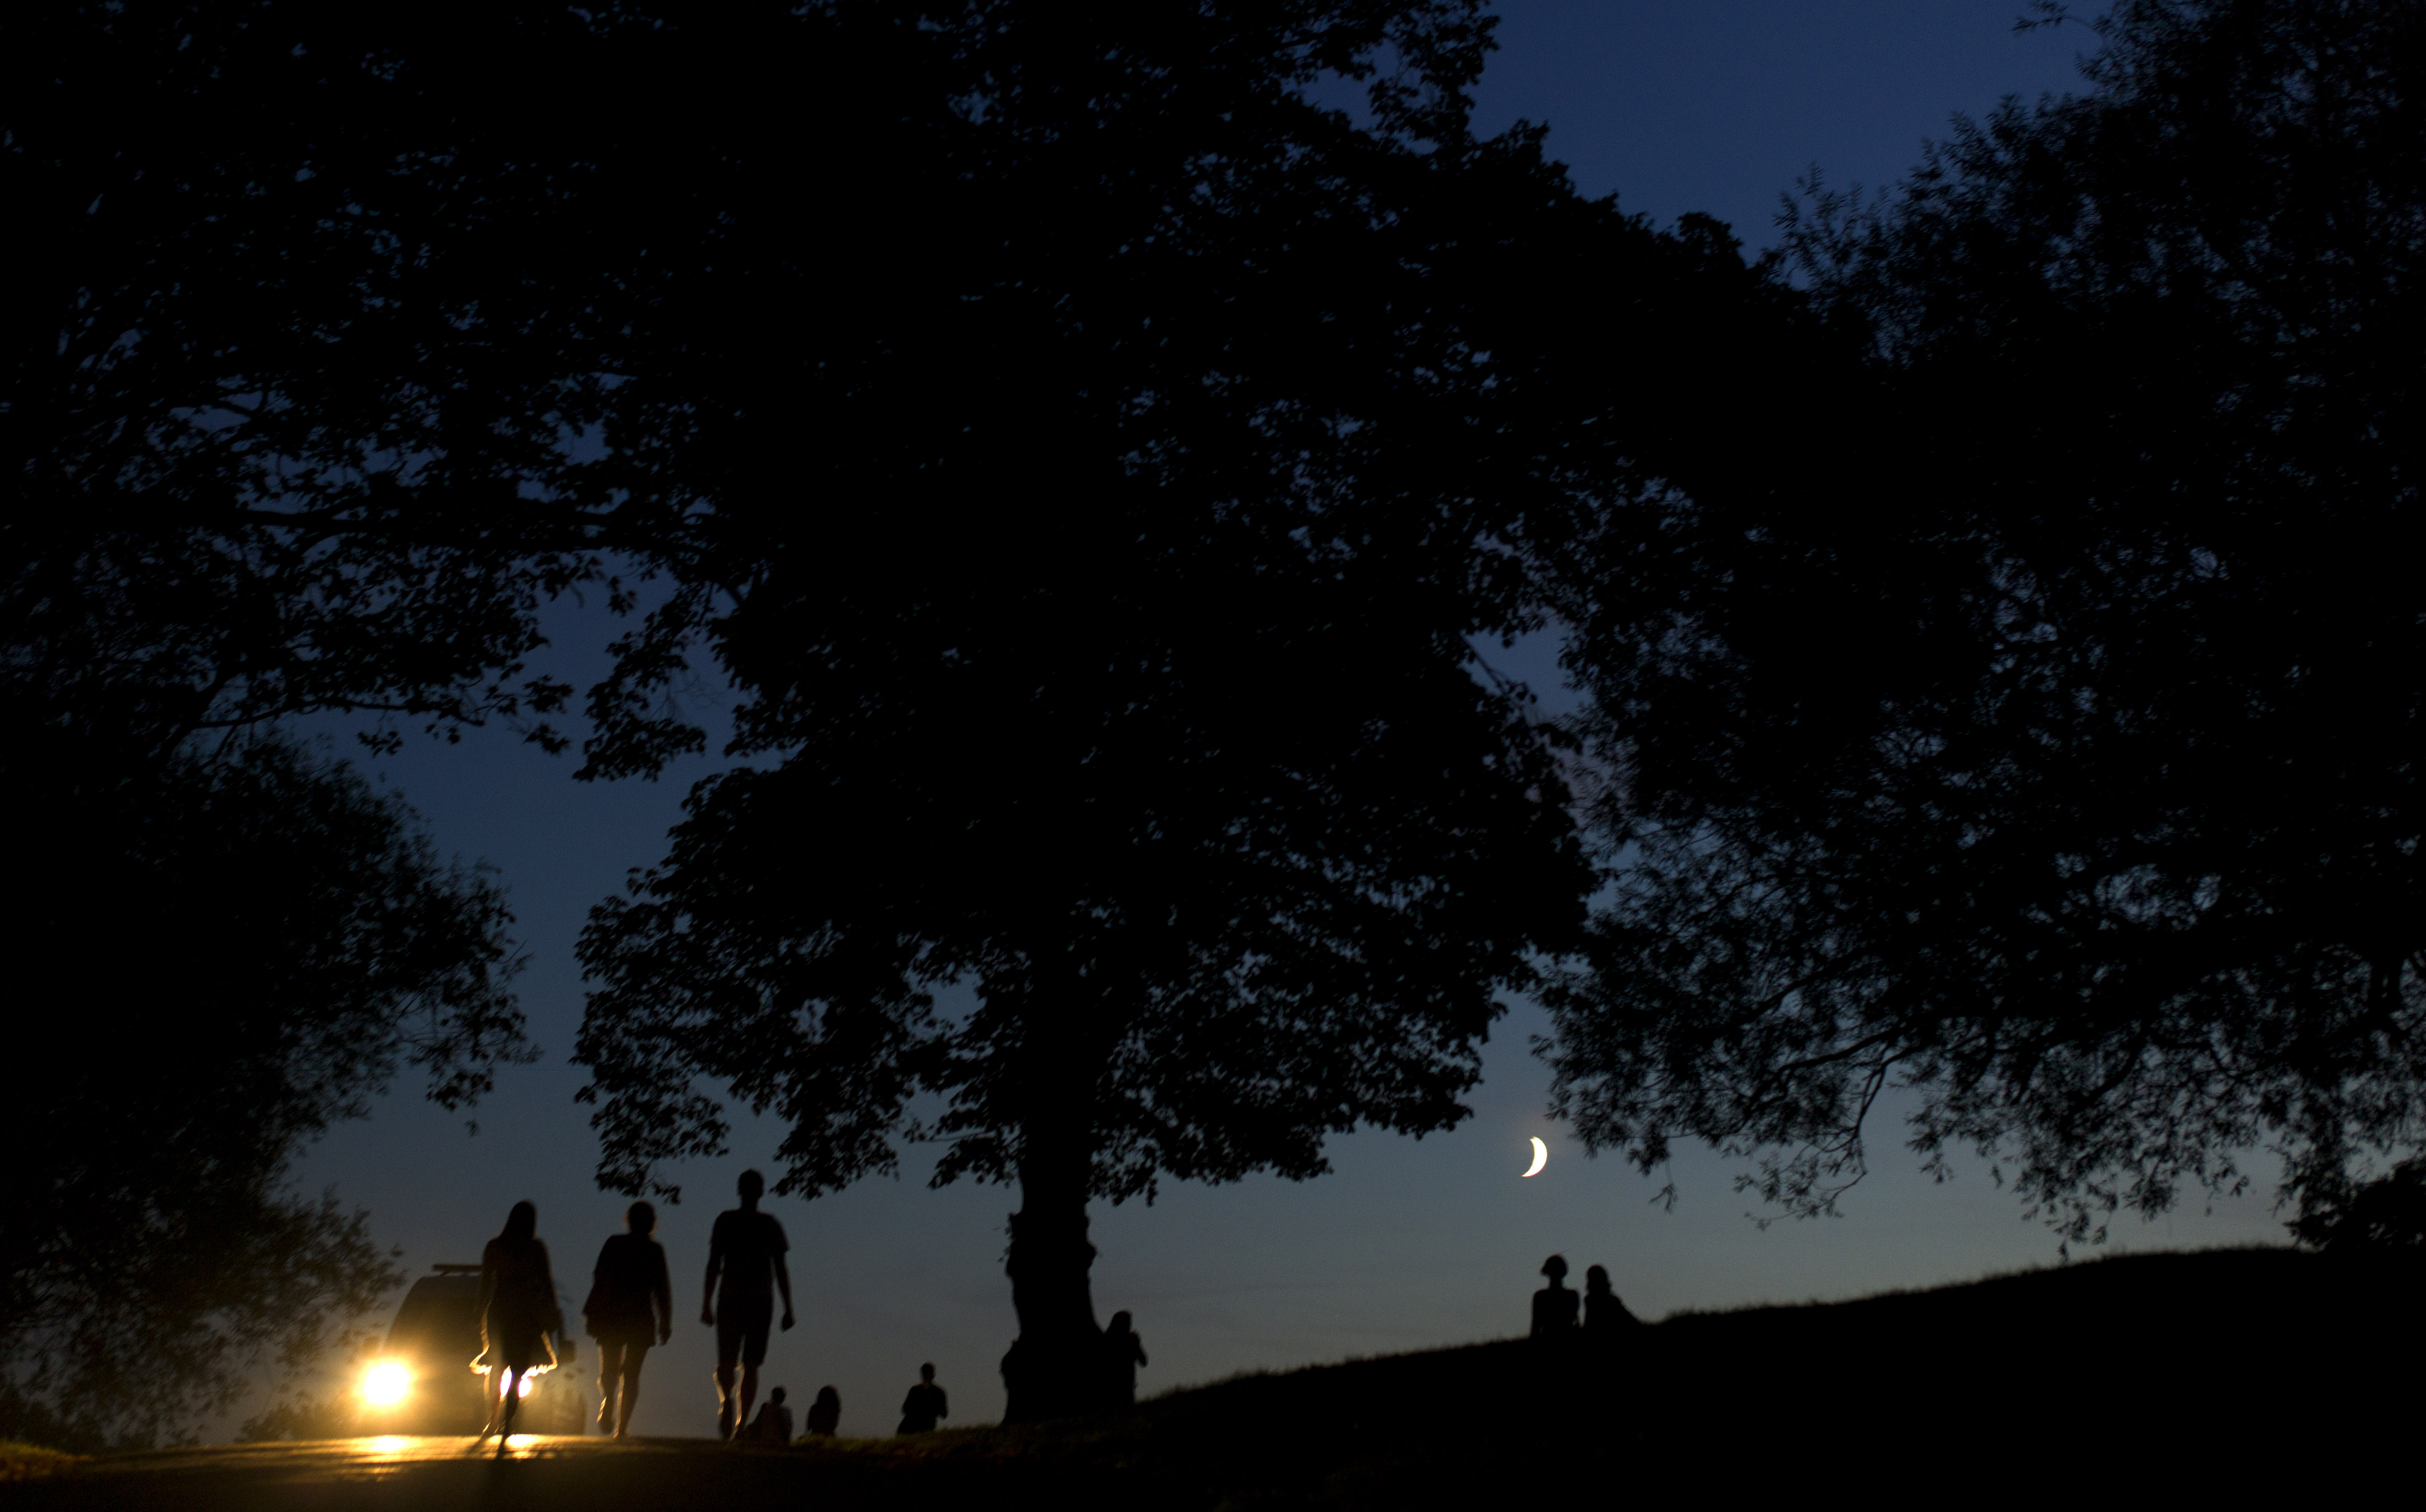 A police vehicle's headlights are seen as people are silhouetted in the fading light as the moon peers through the trees during unseasonal hot weather on Hampstead Heath in London, Saturday, Oct. 1, 2011.  Britain experienced the hottest October day on record Saturday, with the national weather service the Met Office saying the temperature reached 85.8 F (29.9 C) at Gravesend in southeast England.  That is the highest October temperature since records began a century ago, beating the previous high of 84.9 F (29.4 C) reached on Oct. 4, 1985.  (AP Photo/Matt Dunham)